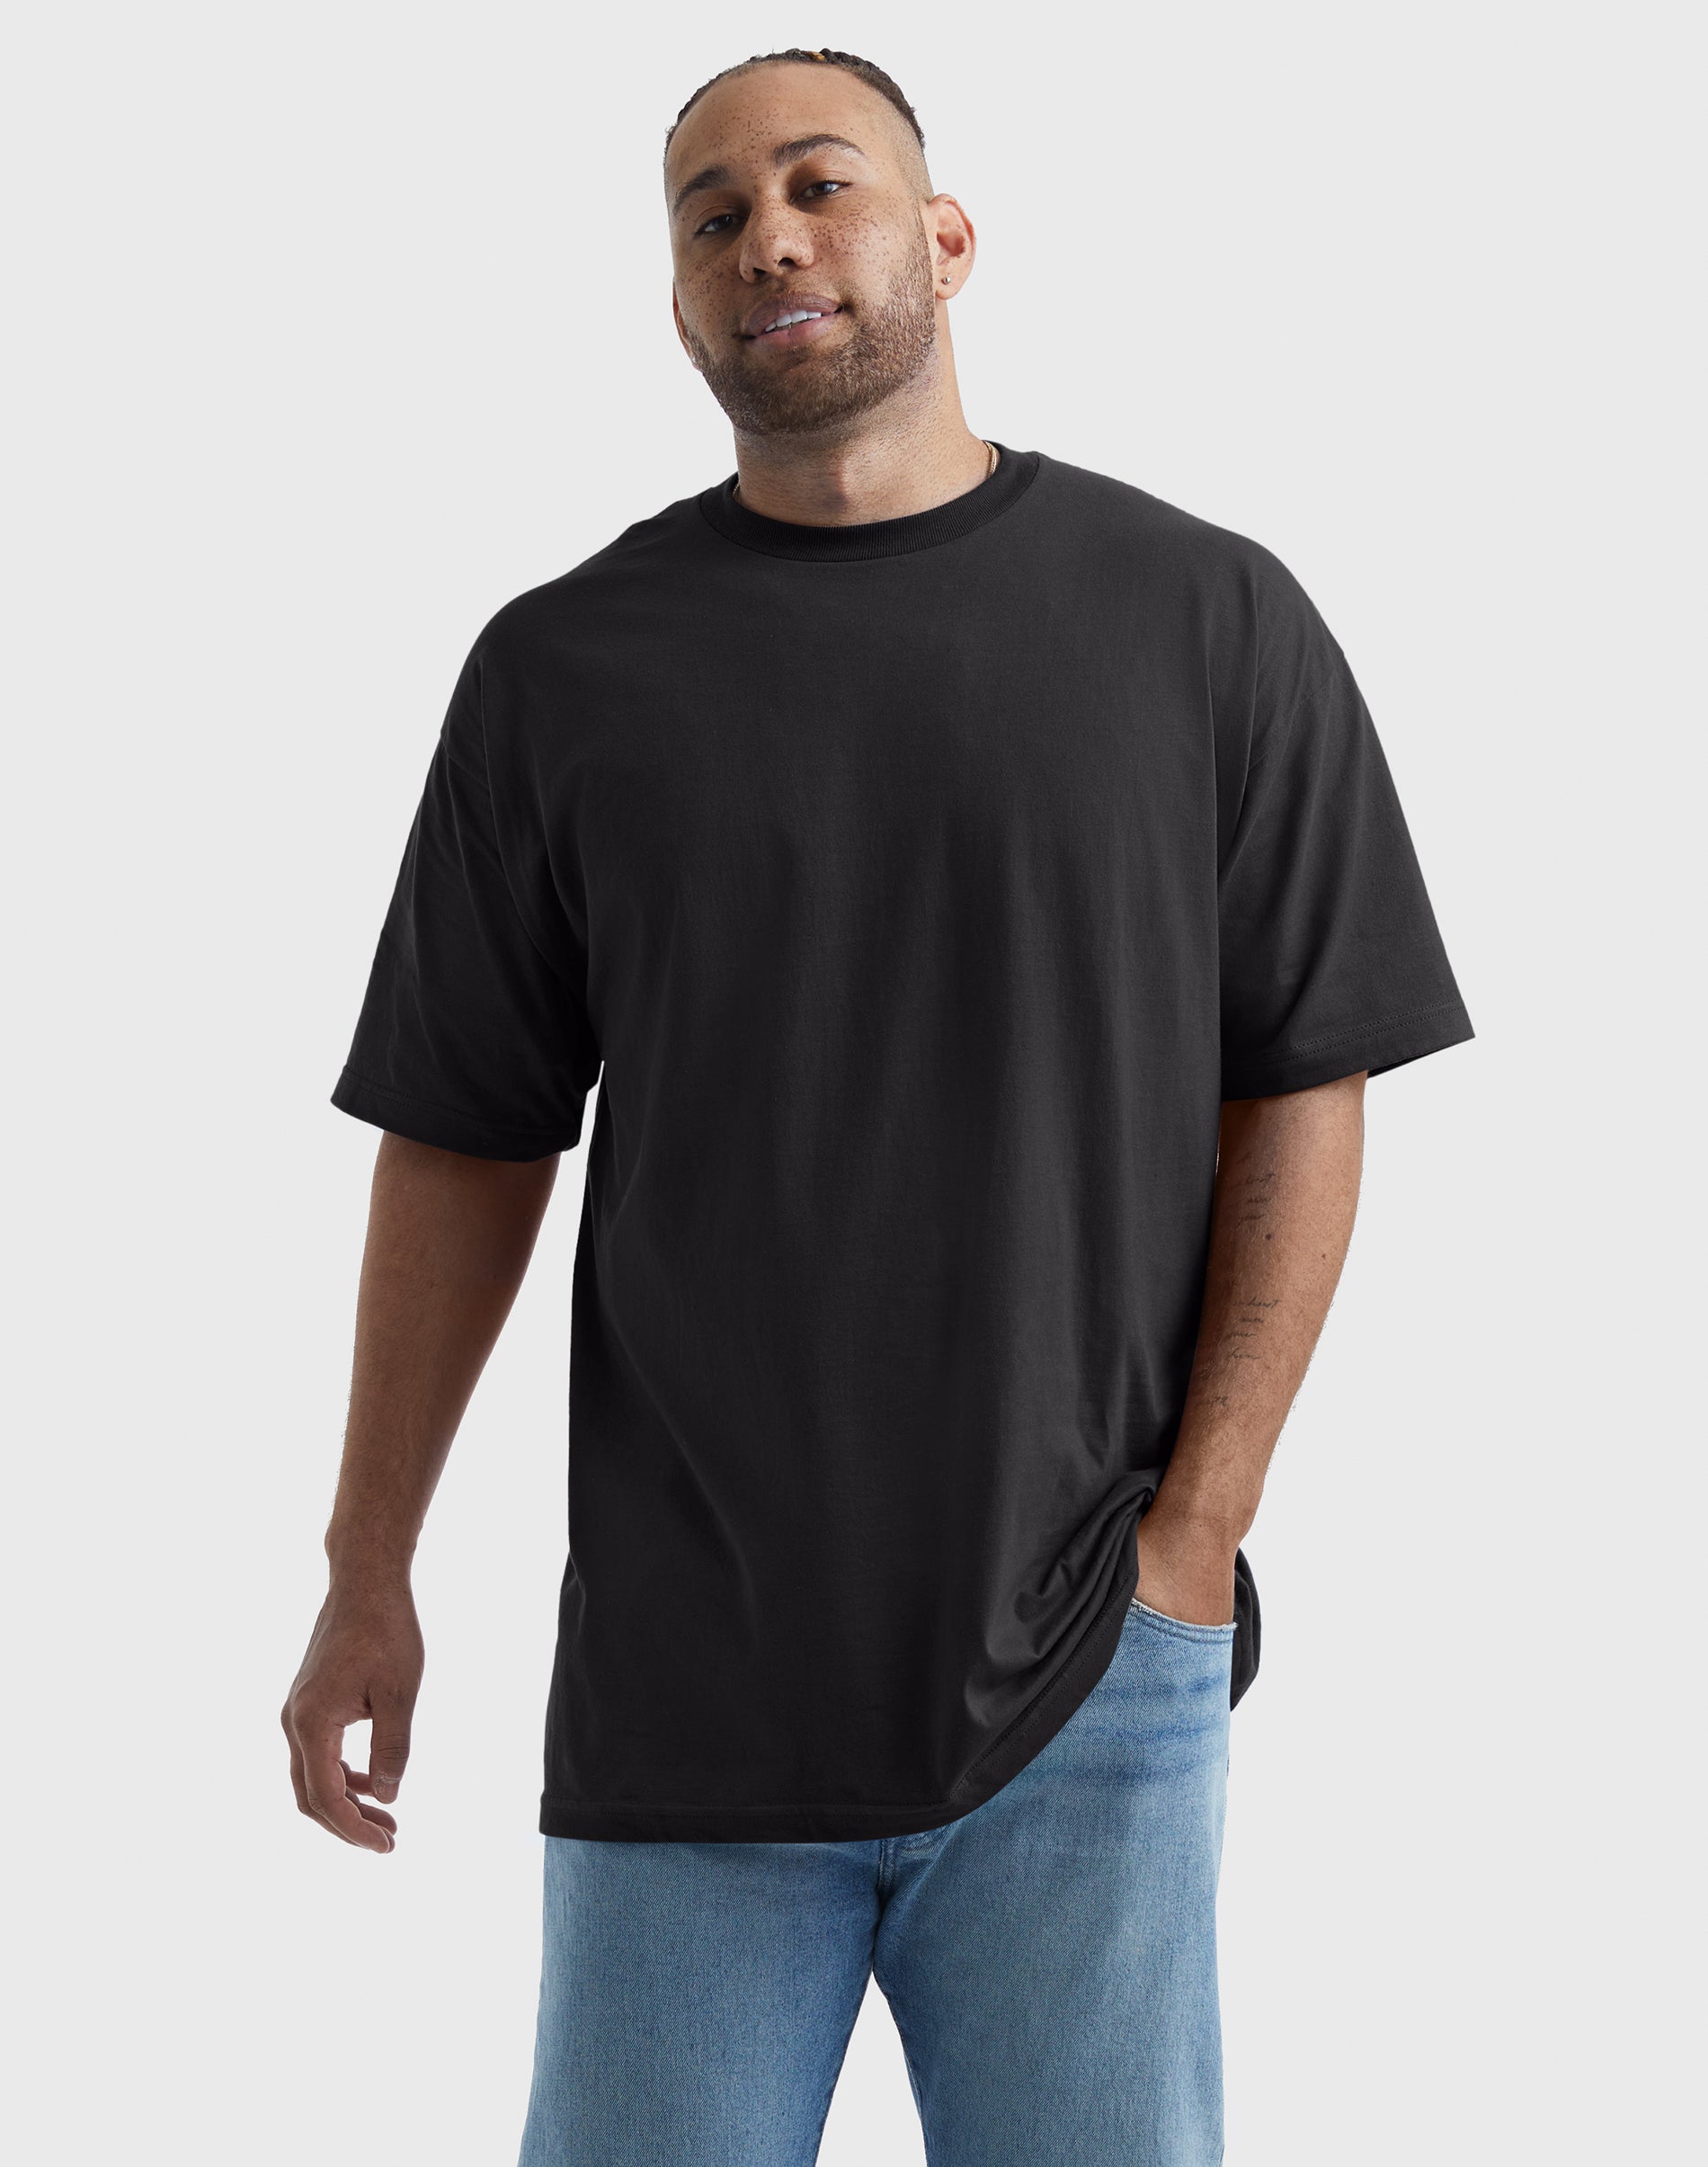 Hanes Big Men's Beefy Heavyweight Short Sleeve T-shirt - Tall Sizes, Up To Size 4XT - image 1 of 4